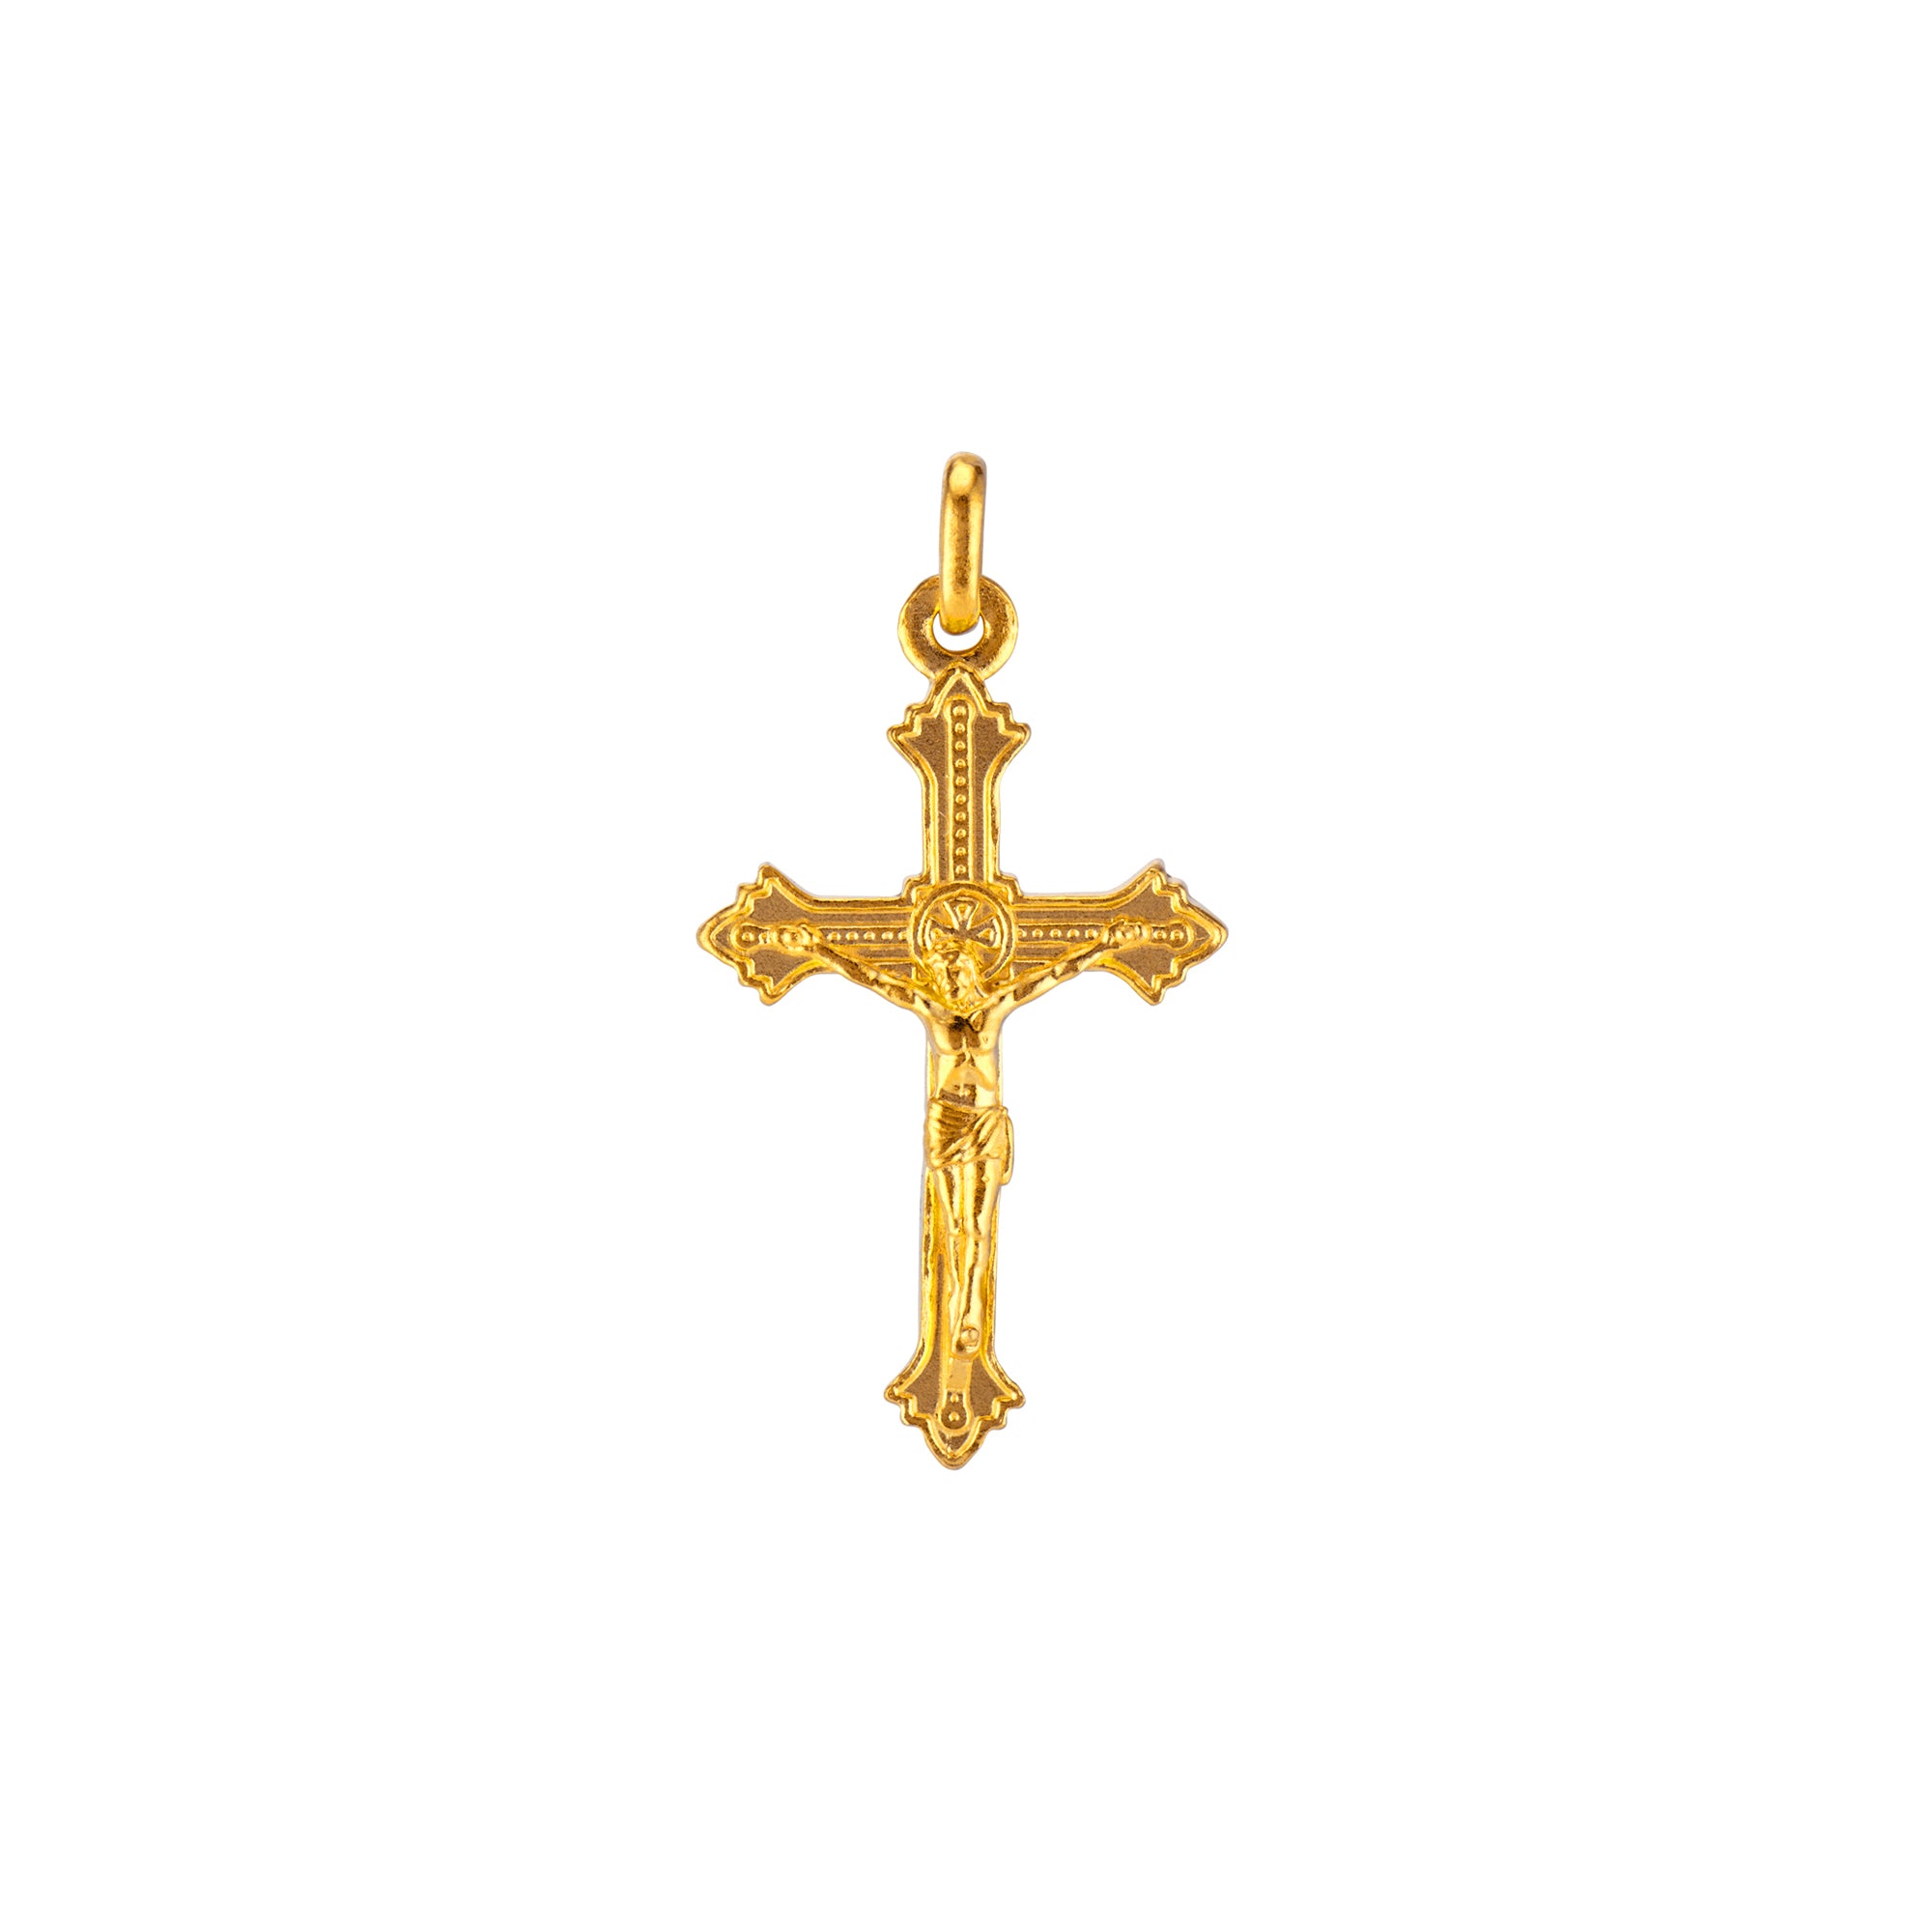 Buy 24K Real Gold Plated Amethyst Gemstone Holy Cross Pendant Necklace  Christian Jewelry 2